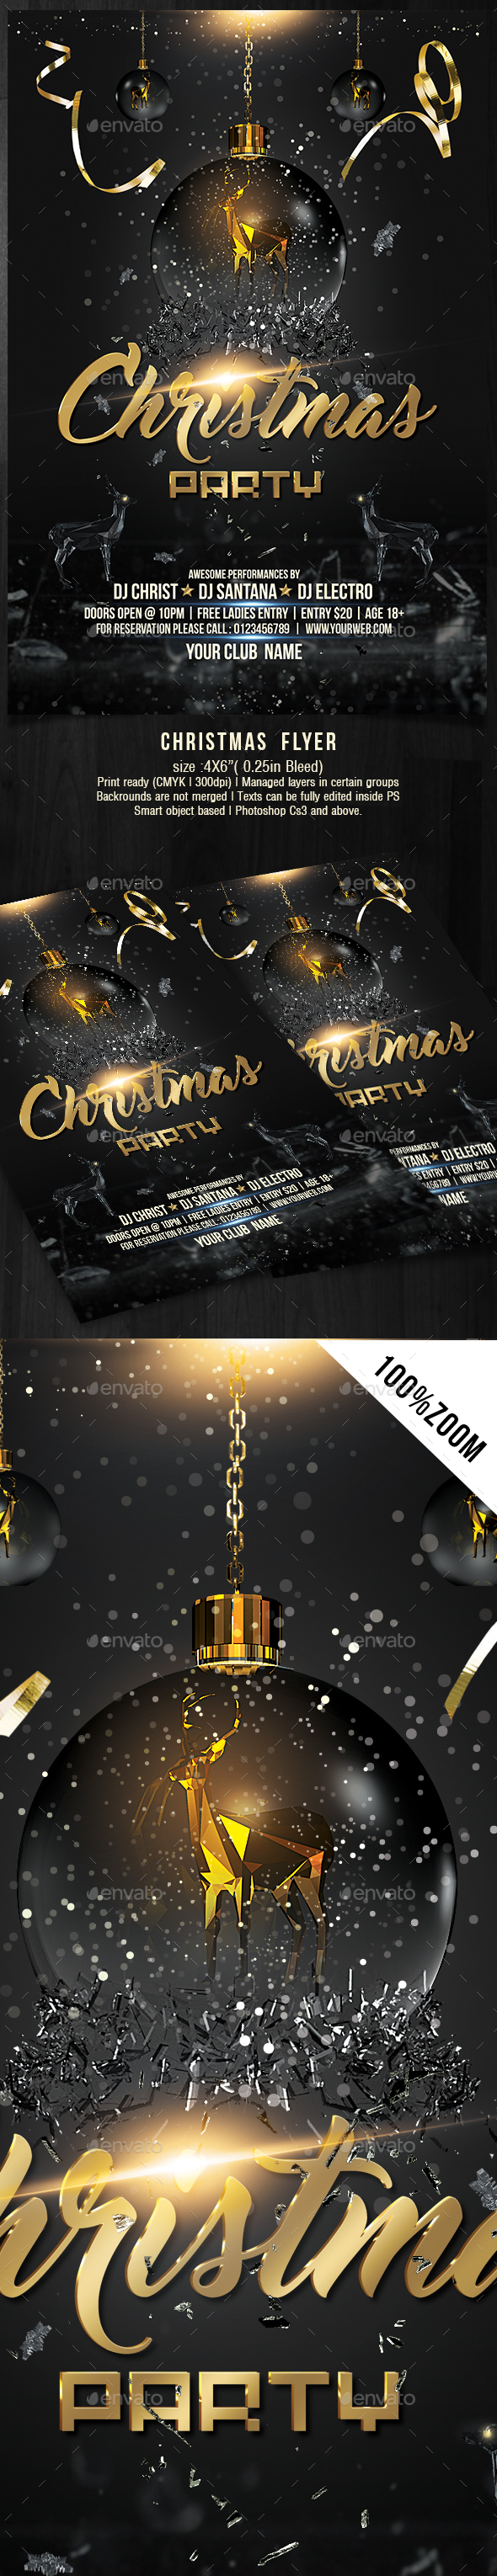 Christmas party Flyer